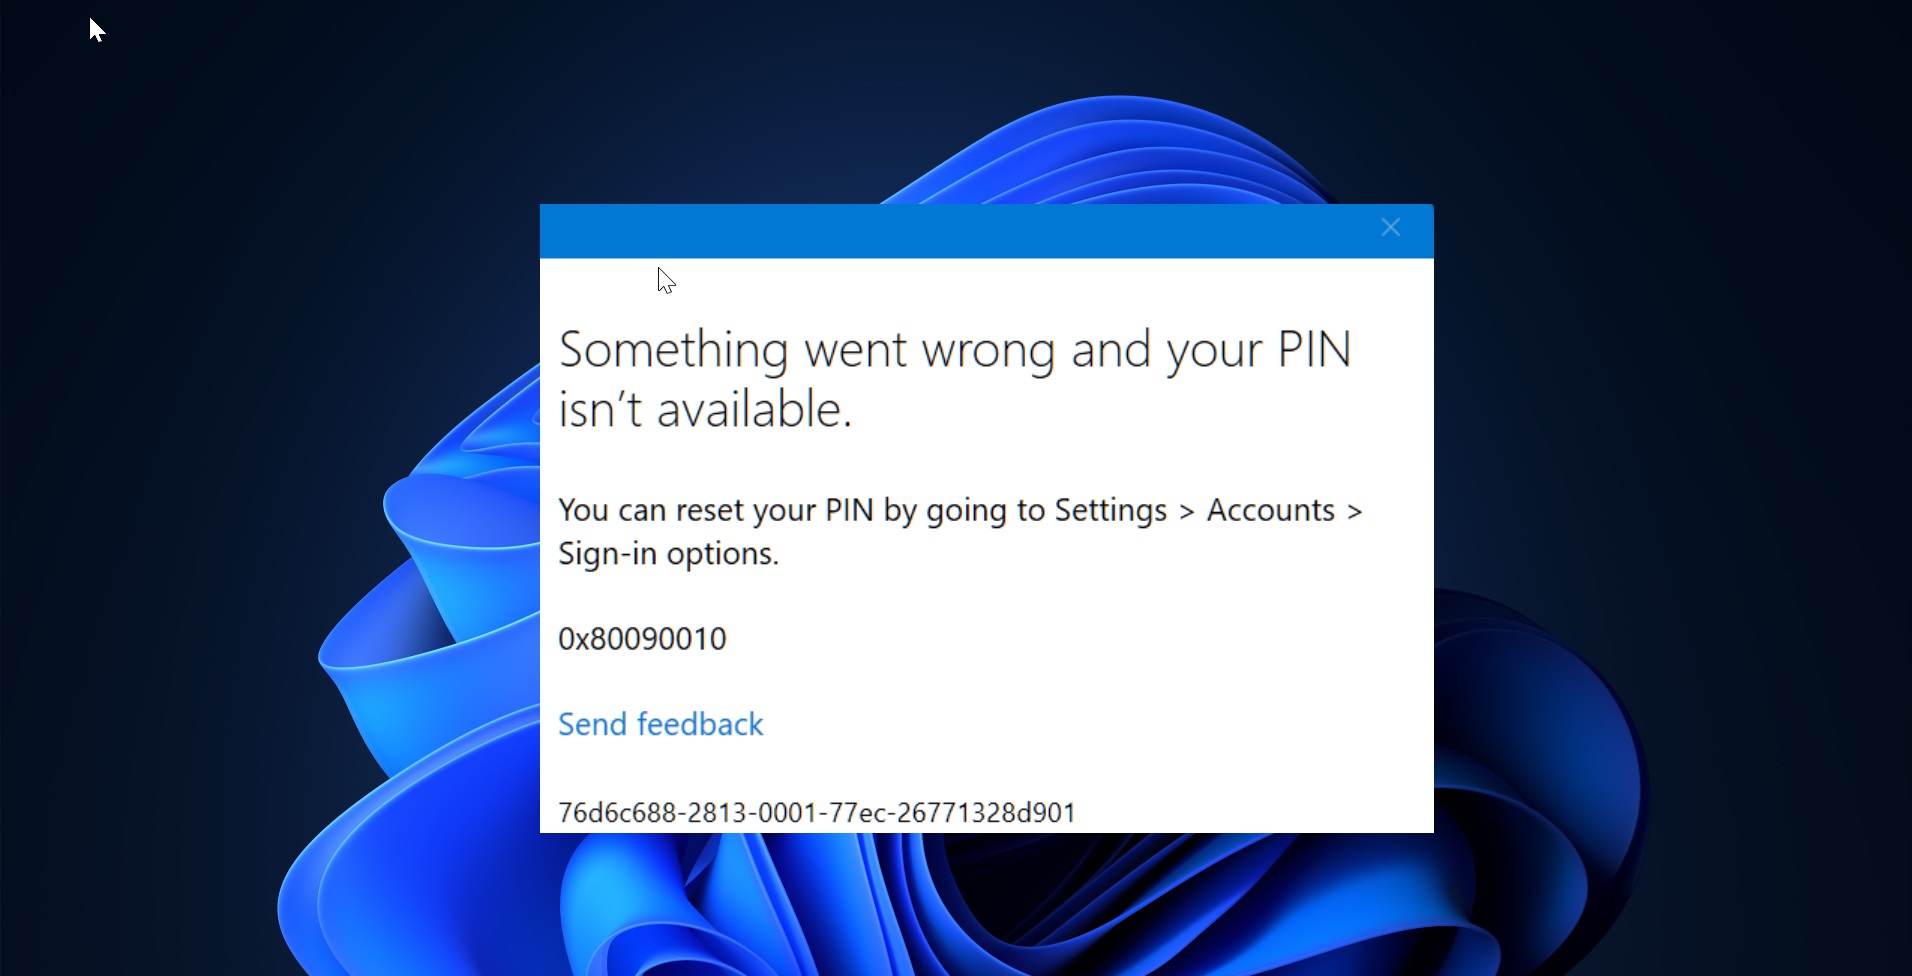 Your PIN isn't available